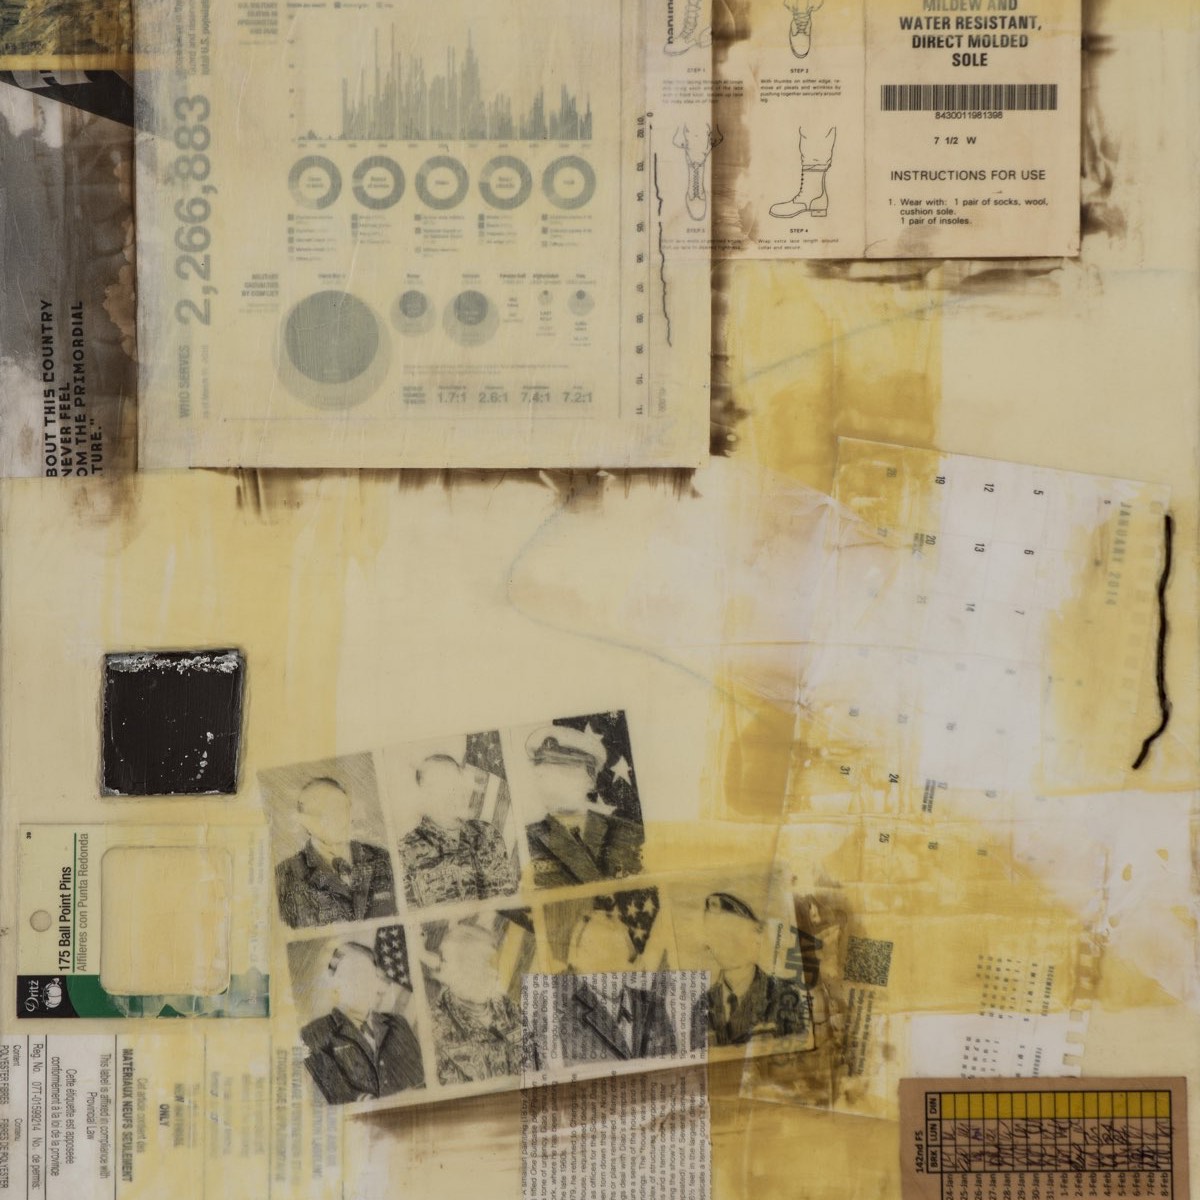 Collaged painting in yellow and white with magazine clippings, tags drawings of military personal, and metal.